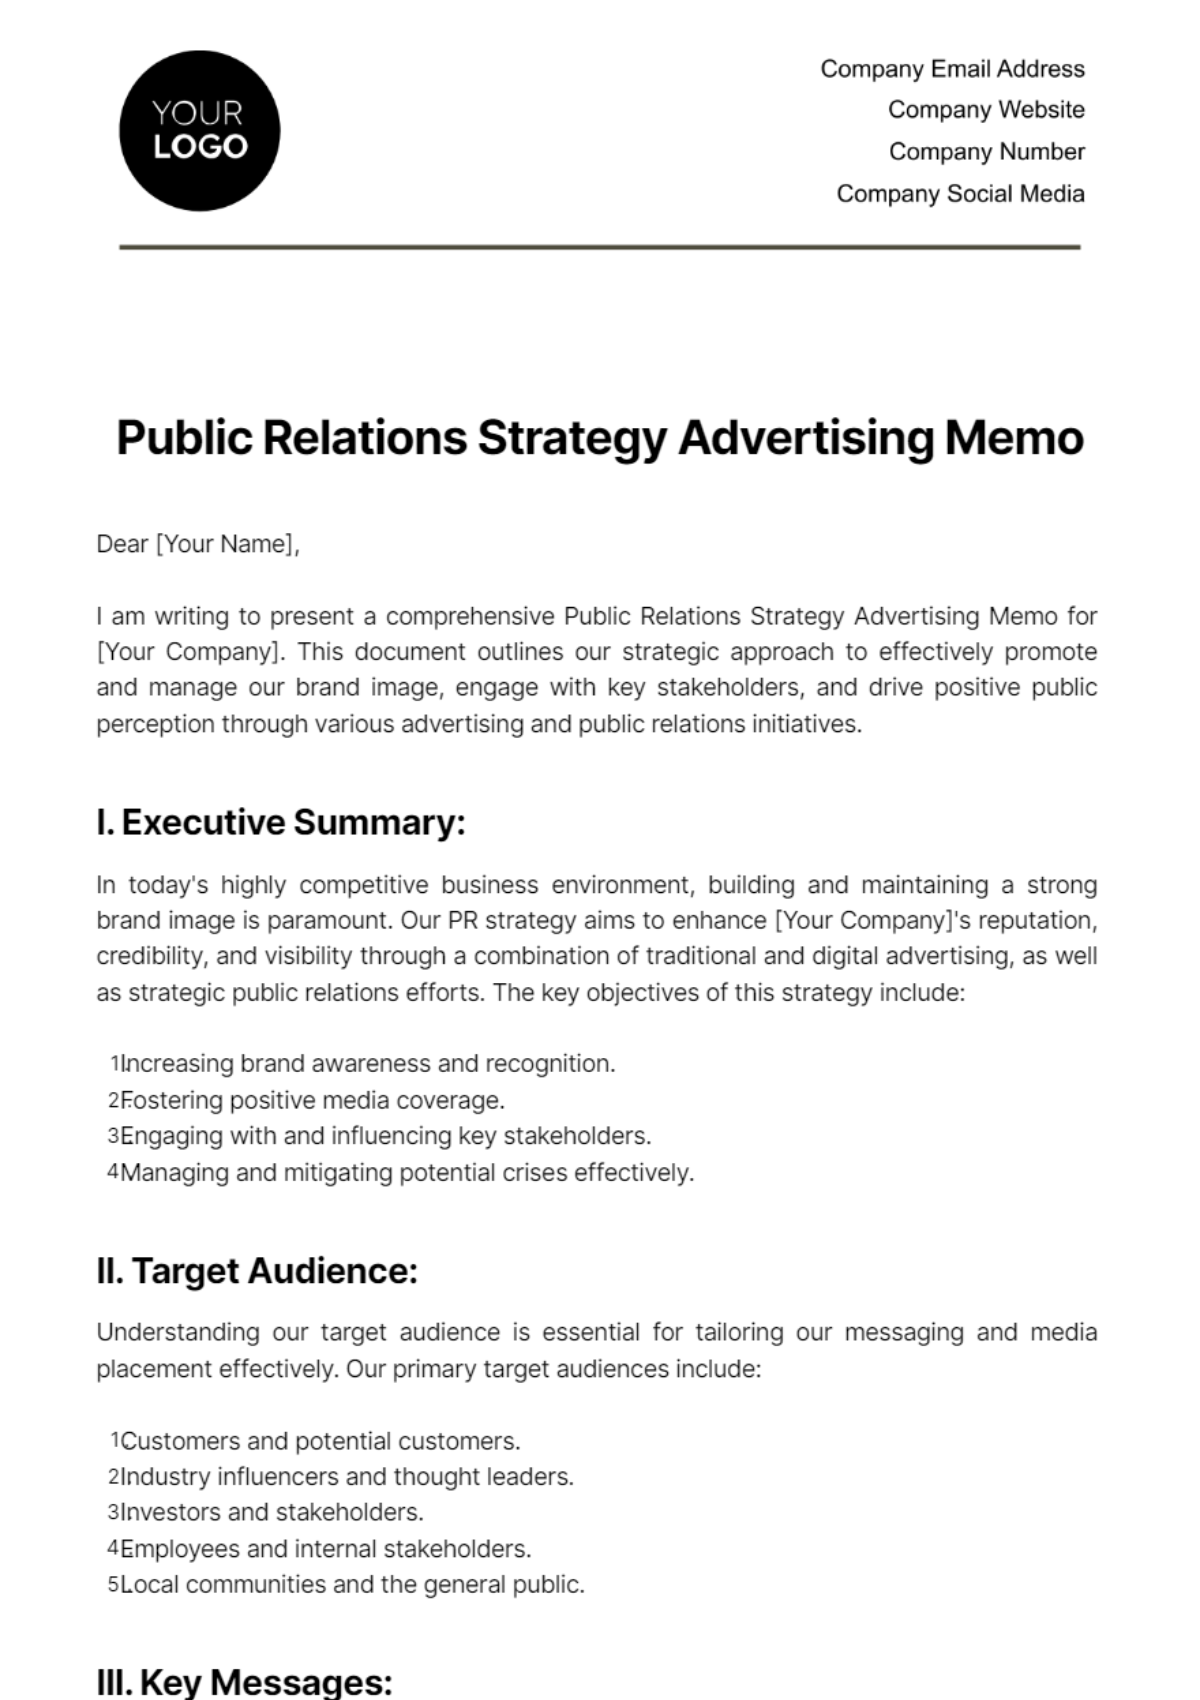 Public Relations Strategy Advertising Memo Template